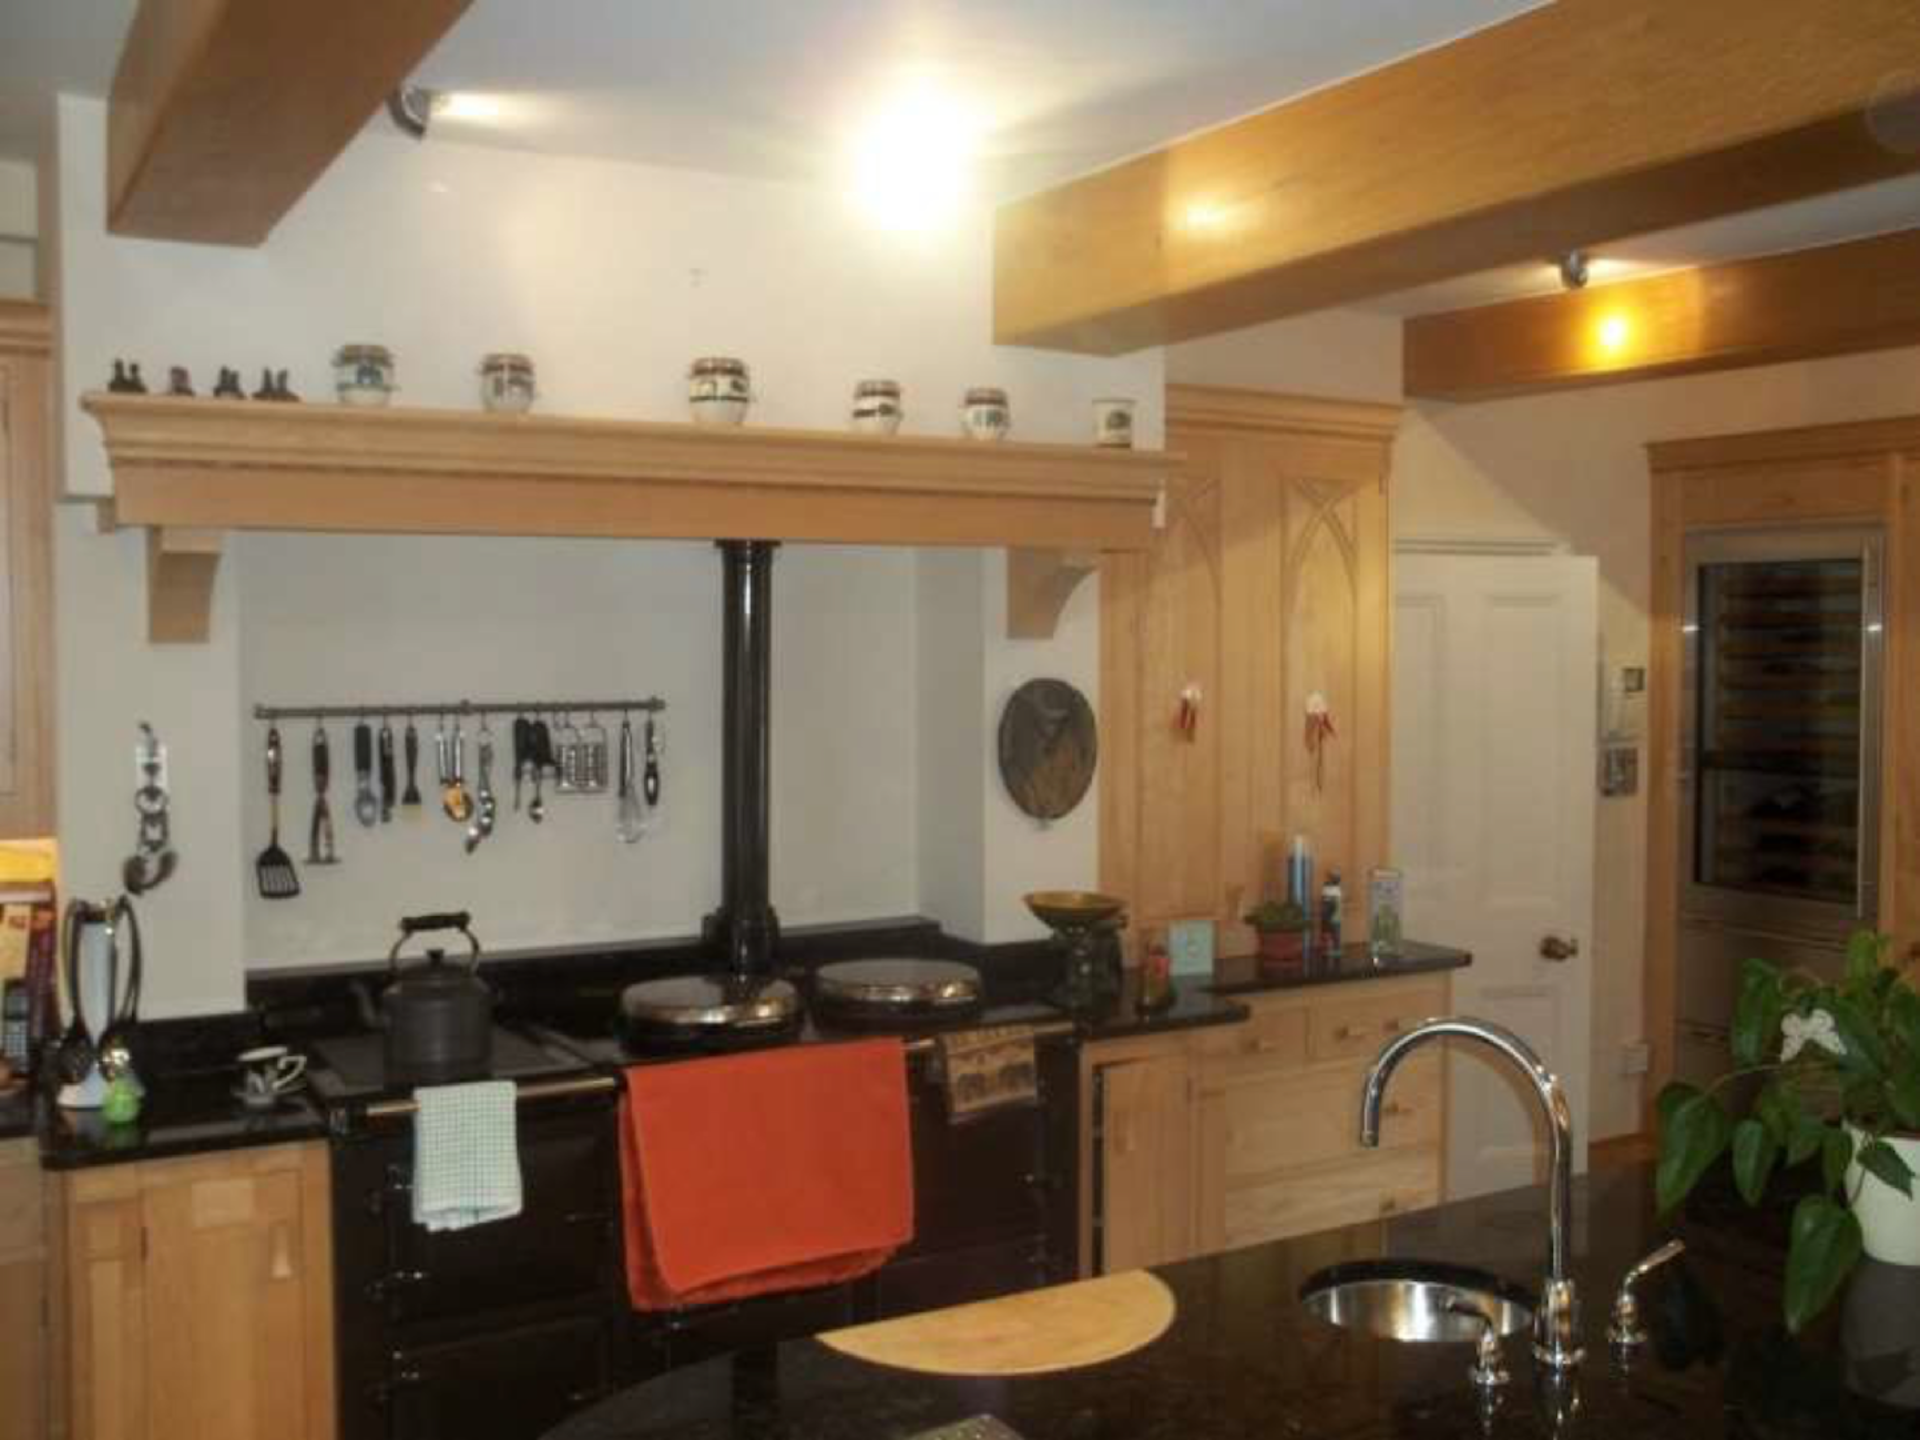 Luxury Used Mark Wilkinson Maple "Mai" Kitchen Complete with Aga and Miele Appliances - Image 6 of 14